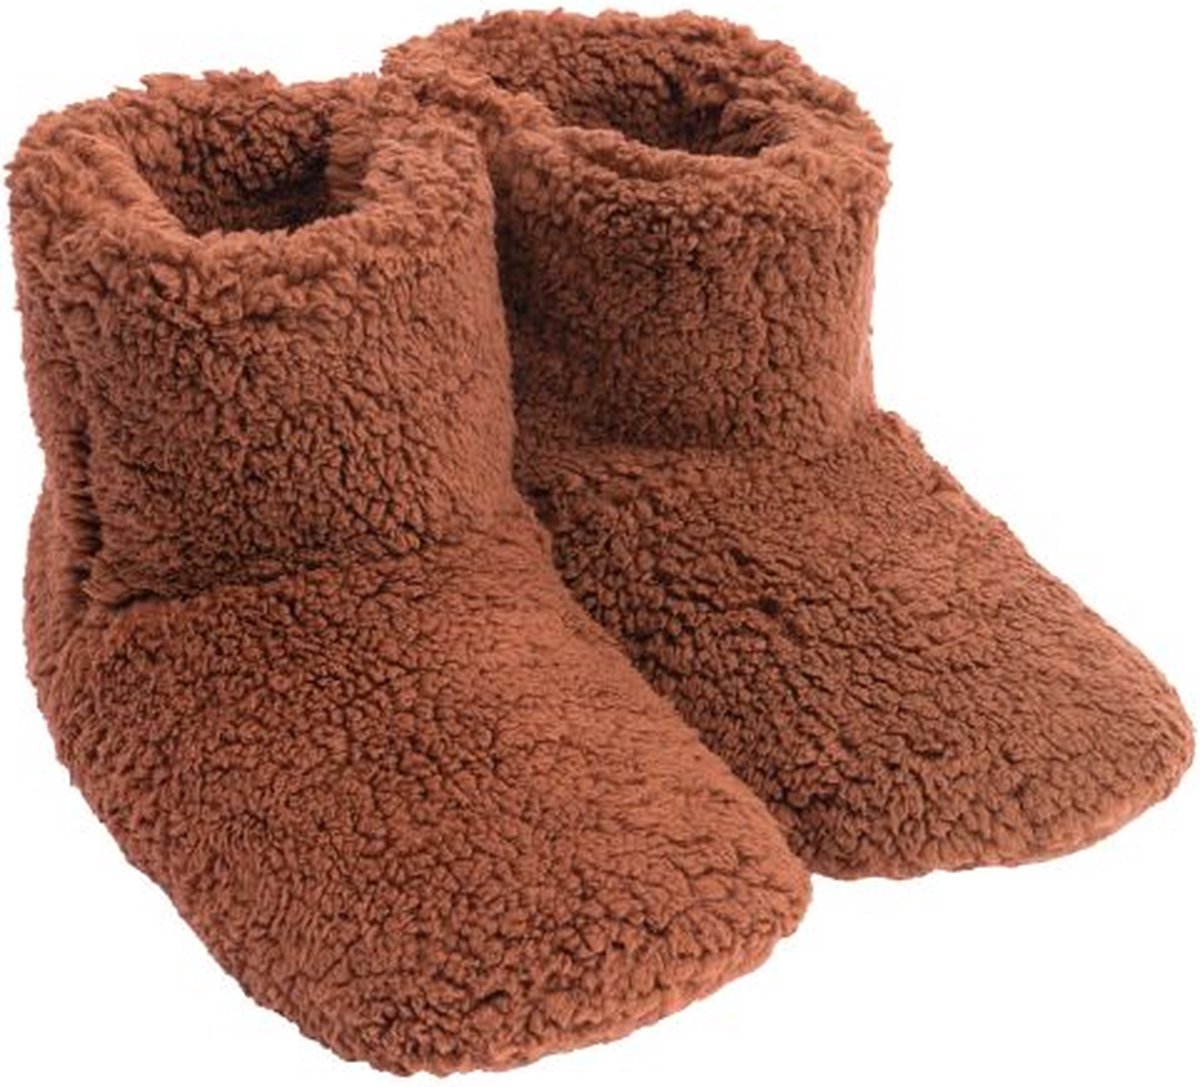 Mistral Home - Pantoffels boots teddy - maat 40/41 - 100% polyester - Bruin